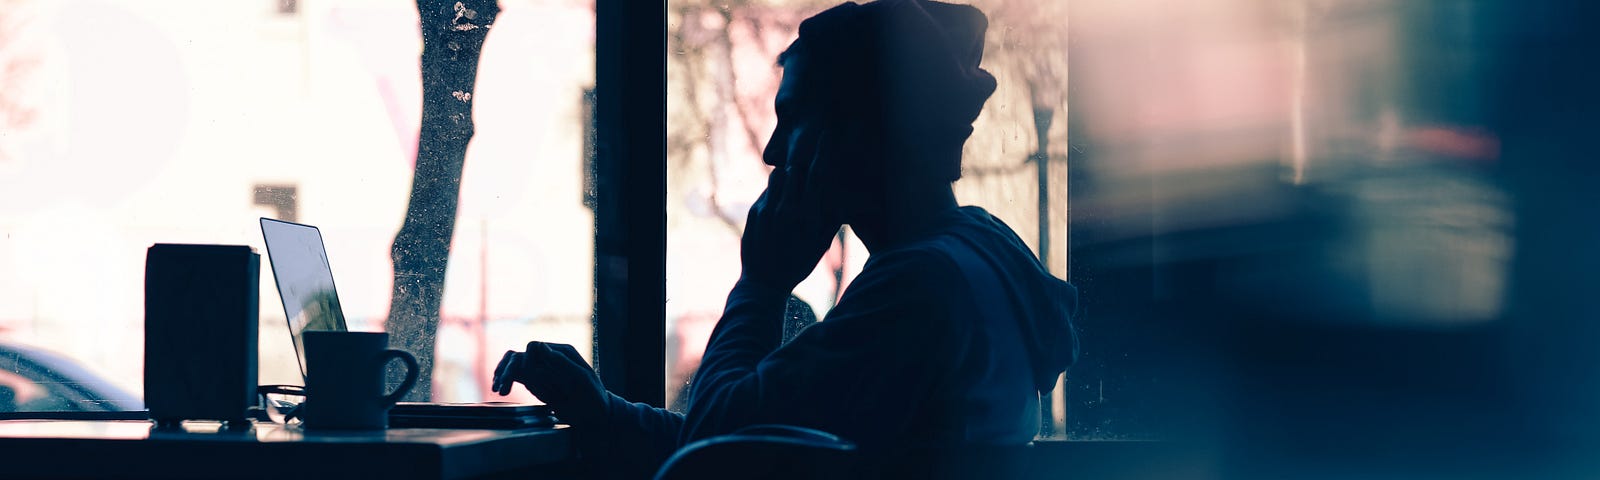 A figure in silhouette sits in a cafe, nursing a mug of coffee or tea. They have a laptop on the table in front of them, and they appear to be thinking through a problem.